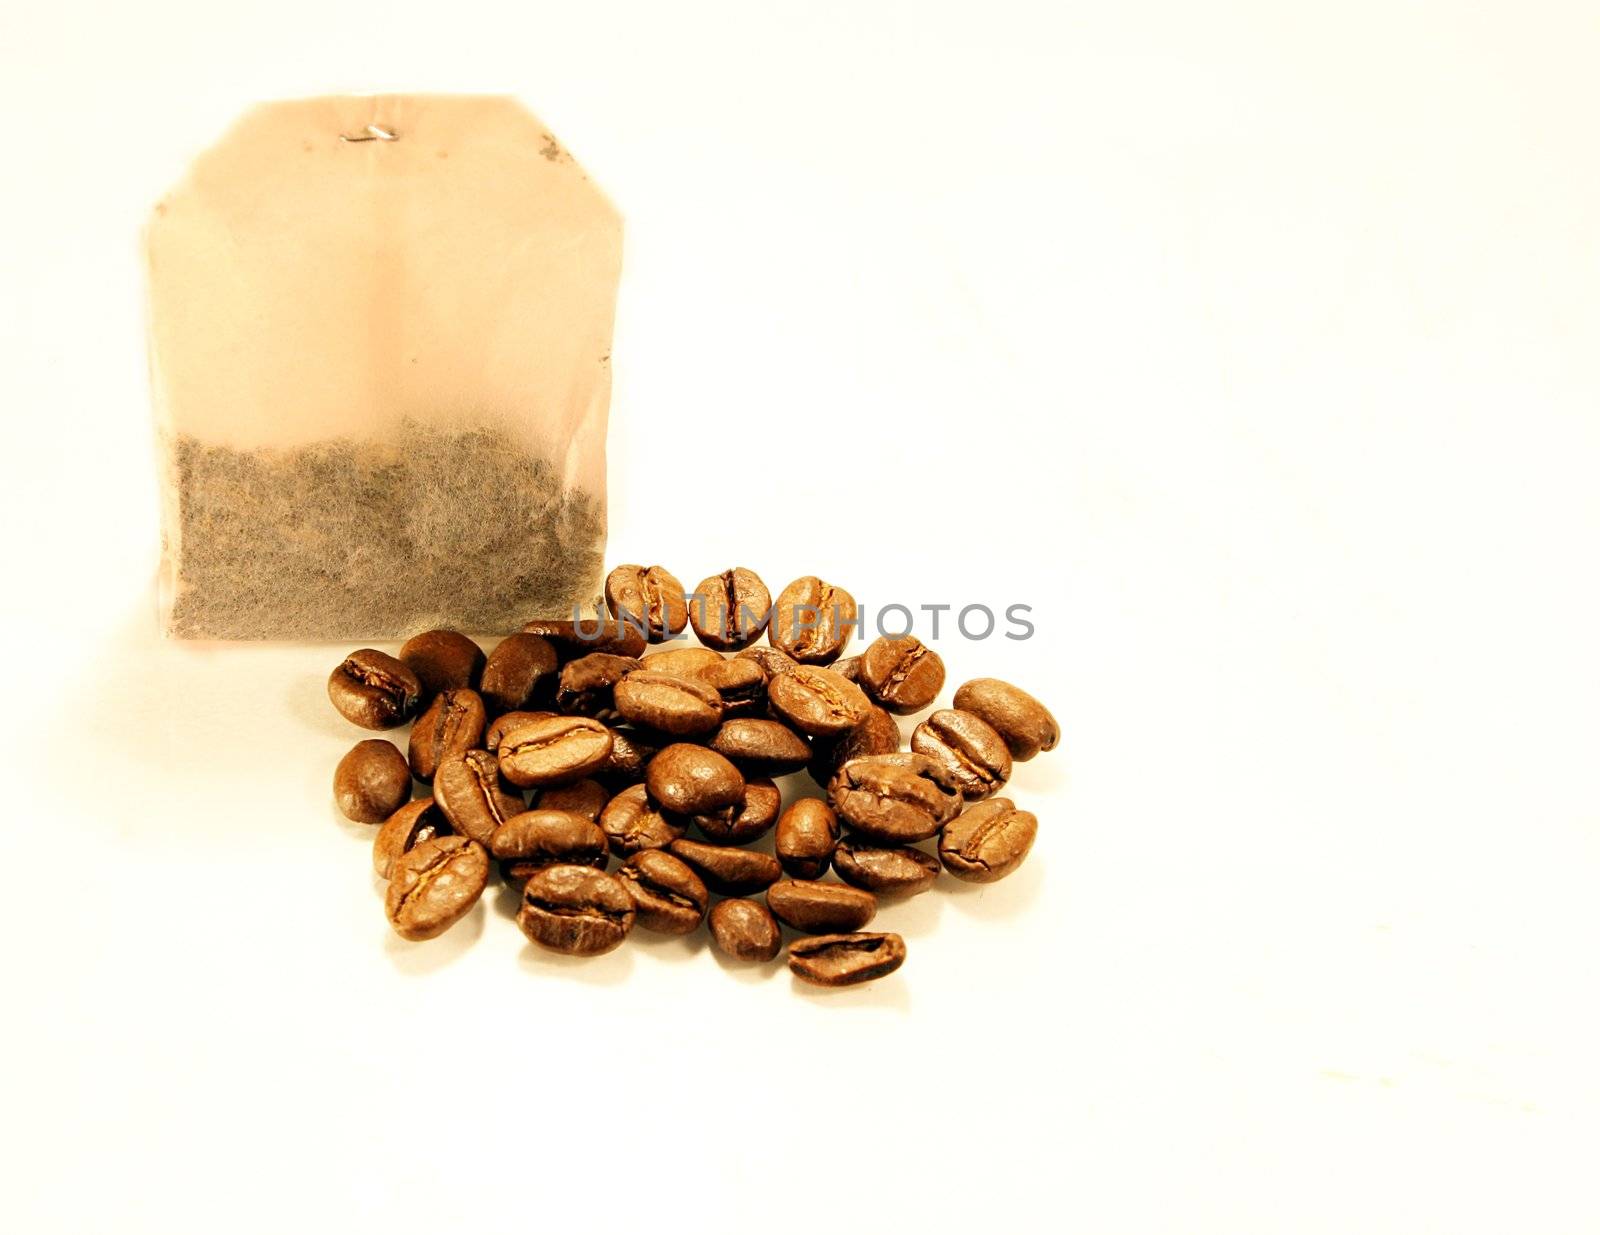 Tea bag and coffe beans isolated on white background